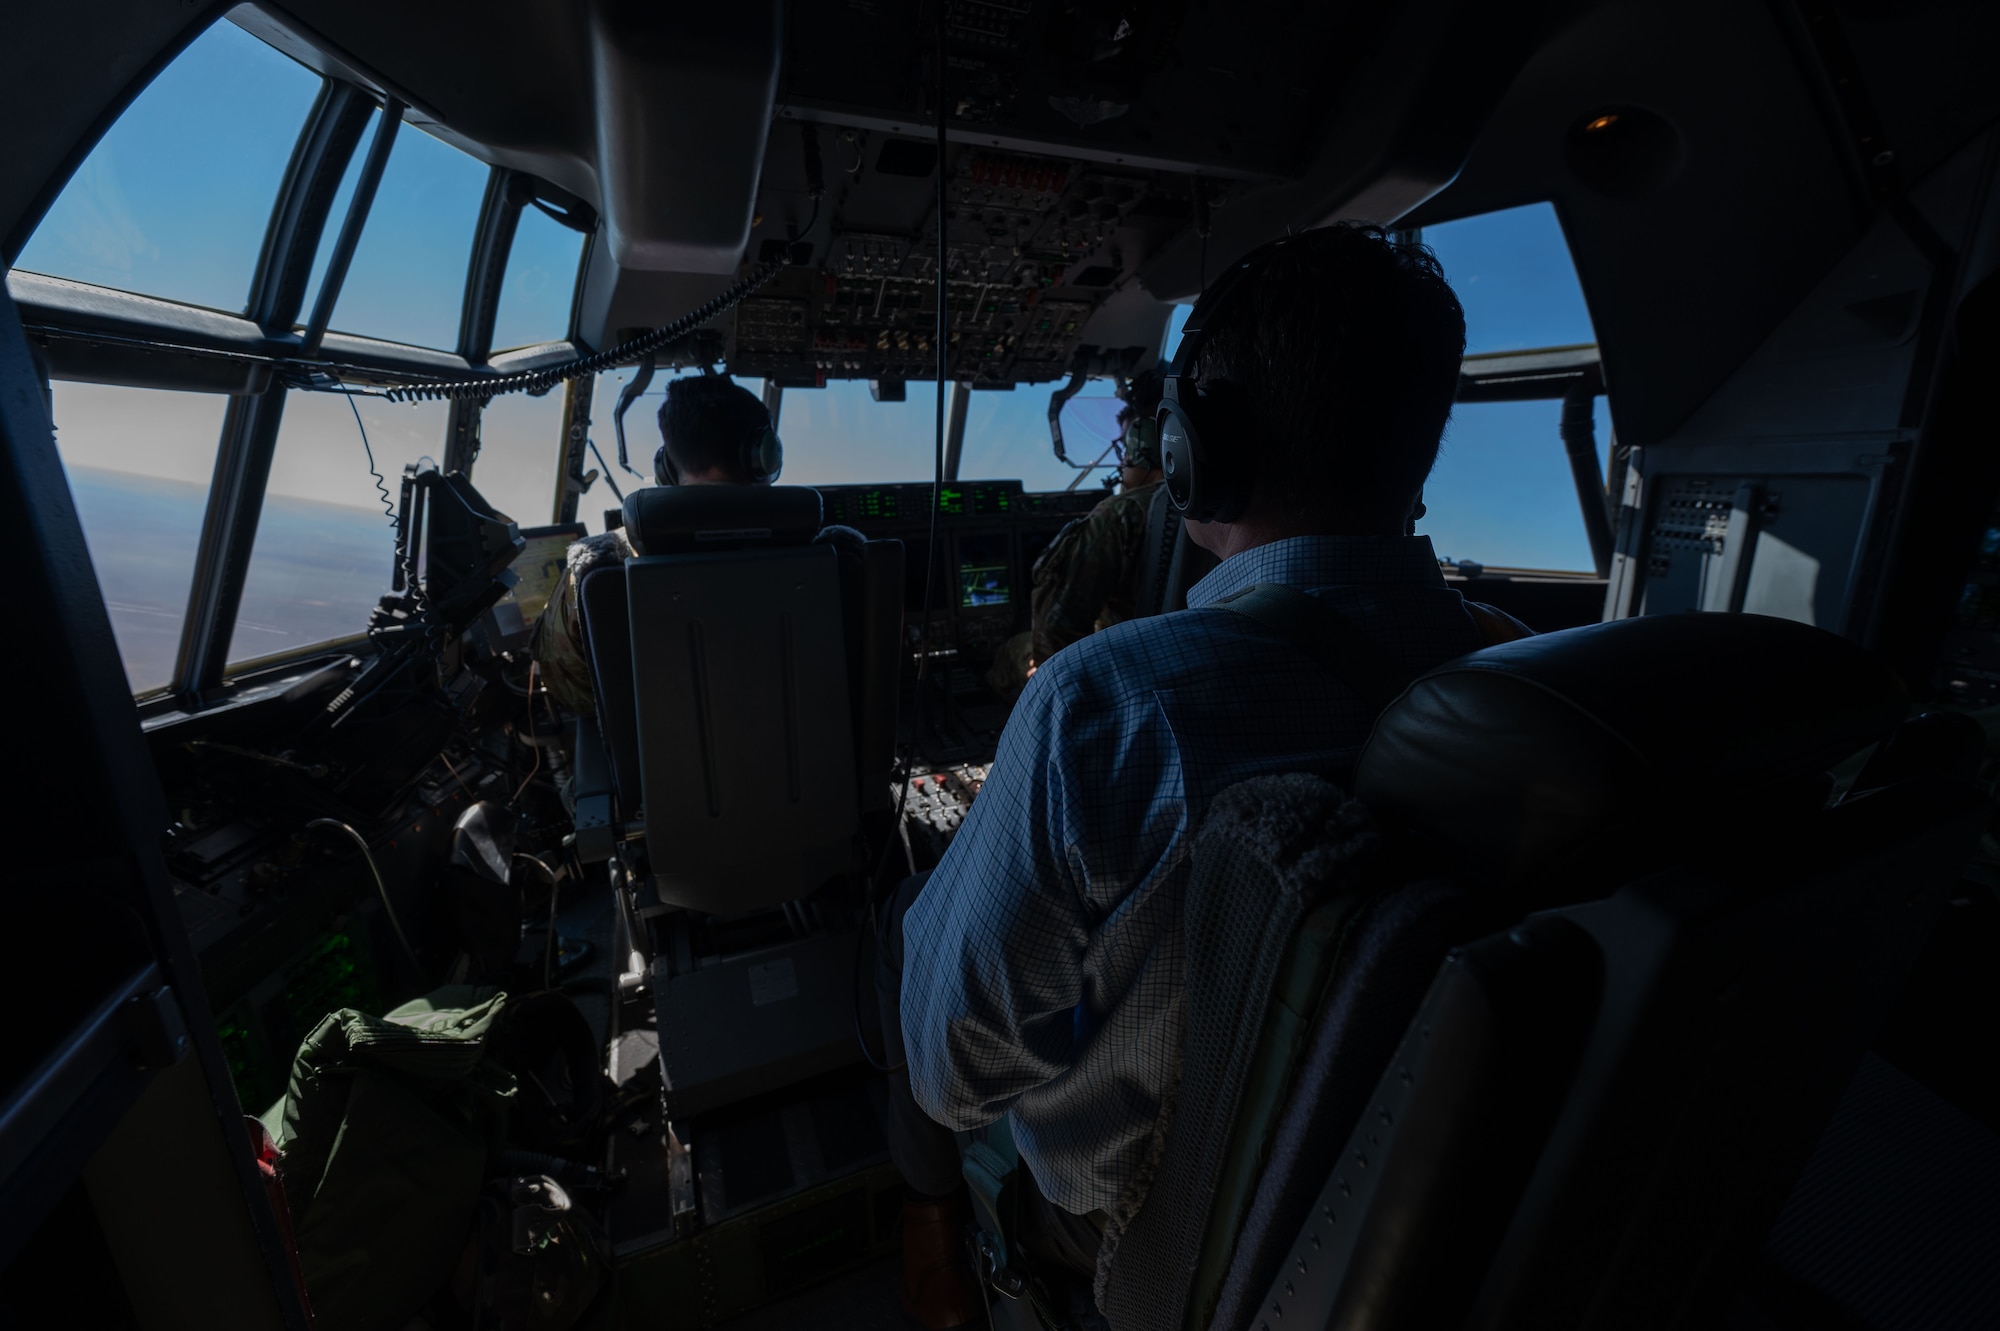 Honorable Christopher Maier, Assistant Secretary of Defense for Special Operations and Low Intensity Conflict, flies aboard an AC-130J Ghostrider assigned to the 16th Special Operations Squadron, Cannon Air Force Base, N.M., April 3, 2024. The flight was part of Maier’s visit to the 27th Special Operations Wing, providing him an opportunity to see first-hand how The Steadfast Line is leveraging organic, bottom-up innovation to generate solutions to complex problems across U.S. Special Operations Command and the joint force. (U.S. Air Force photo by Senior Airman Alexcia Givens)